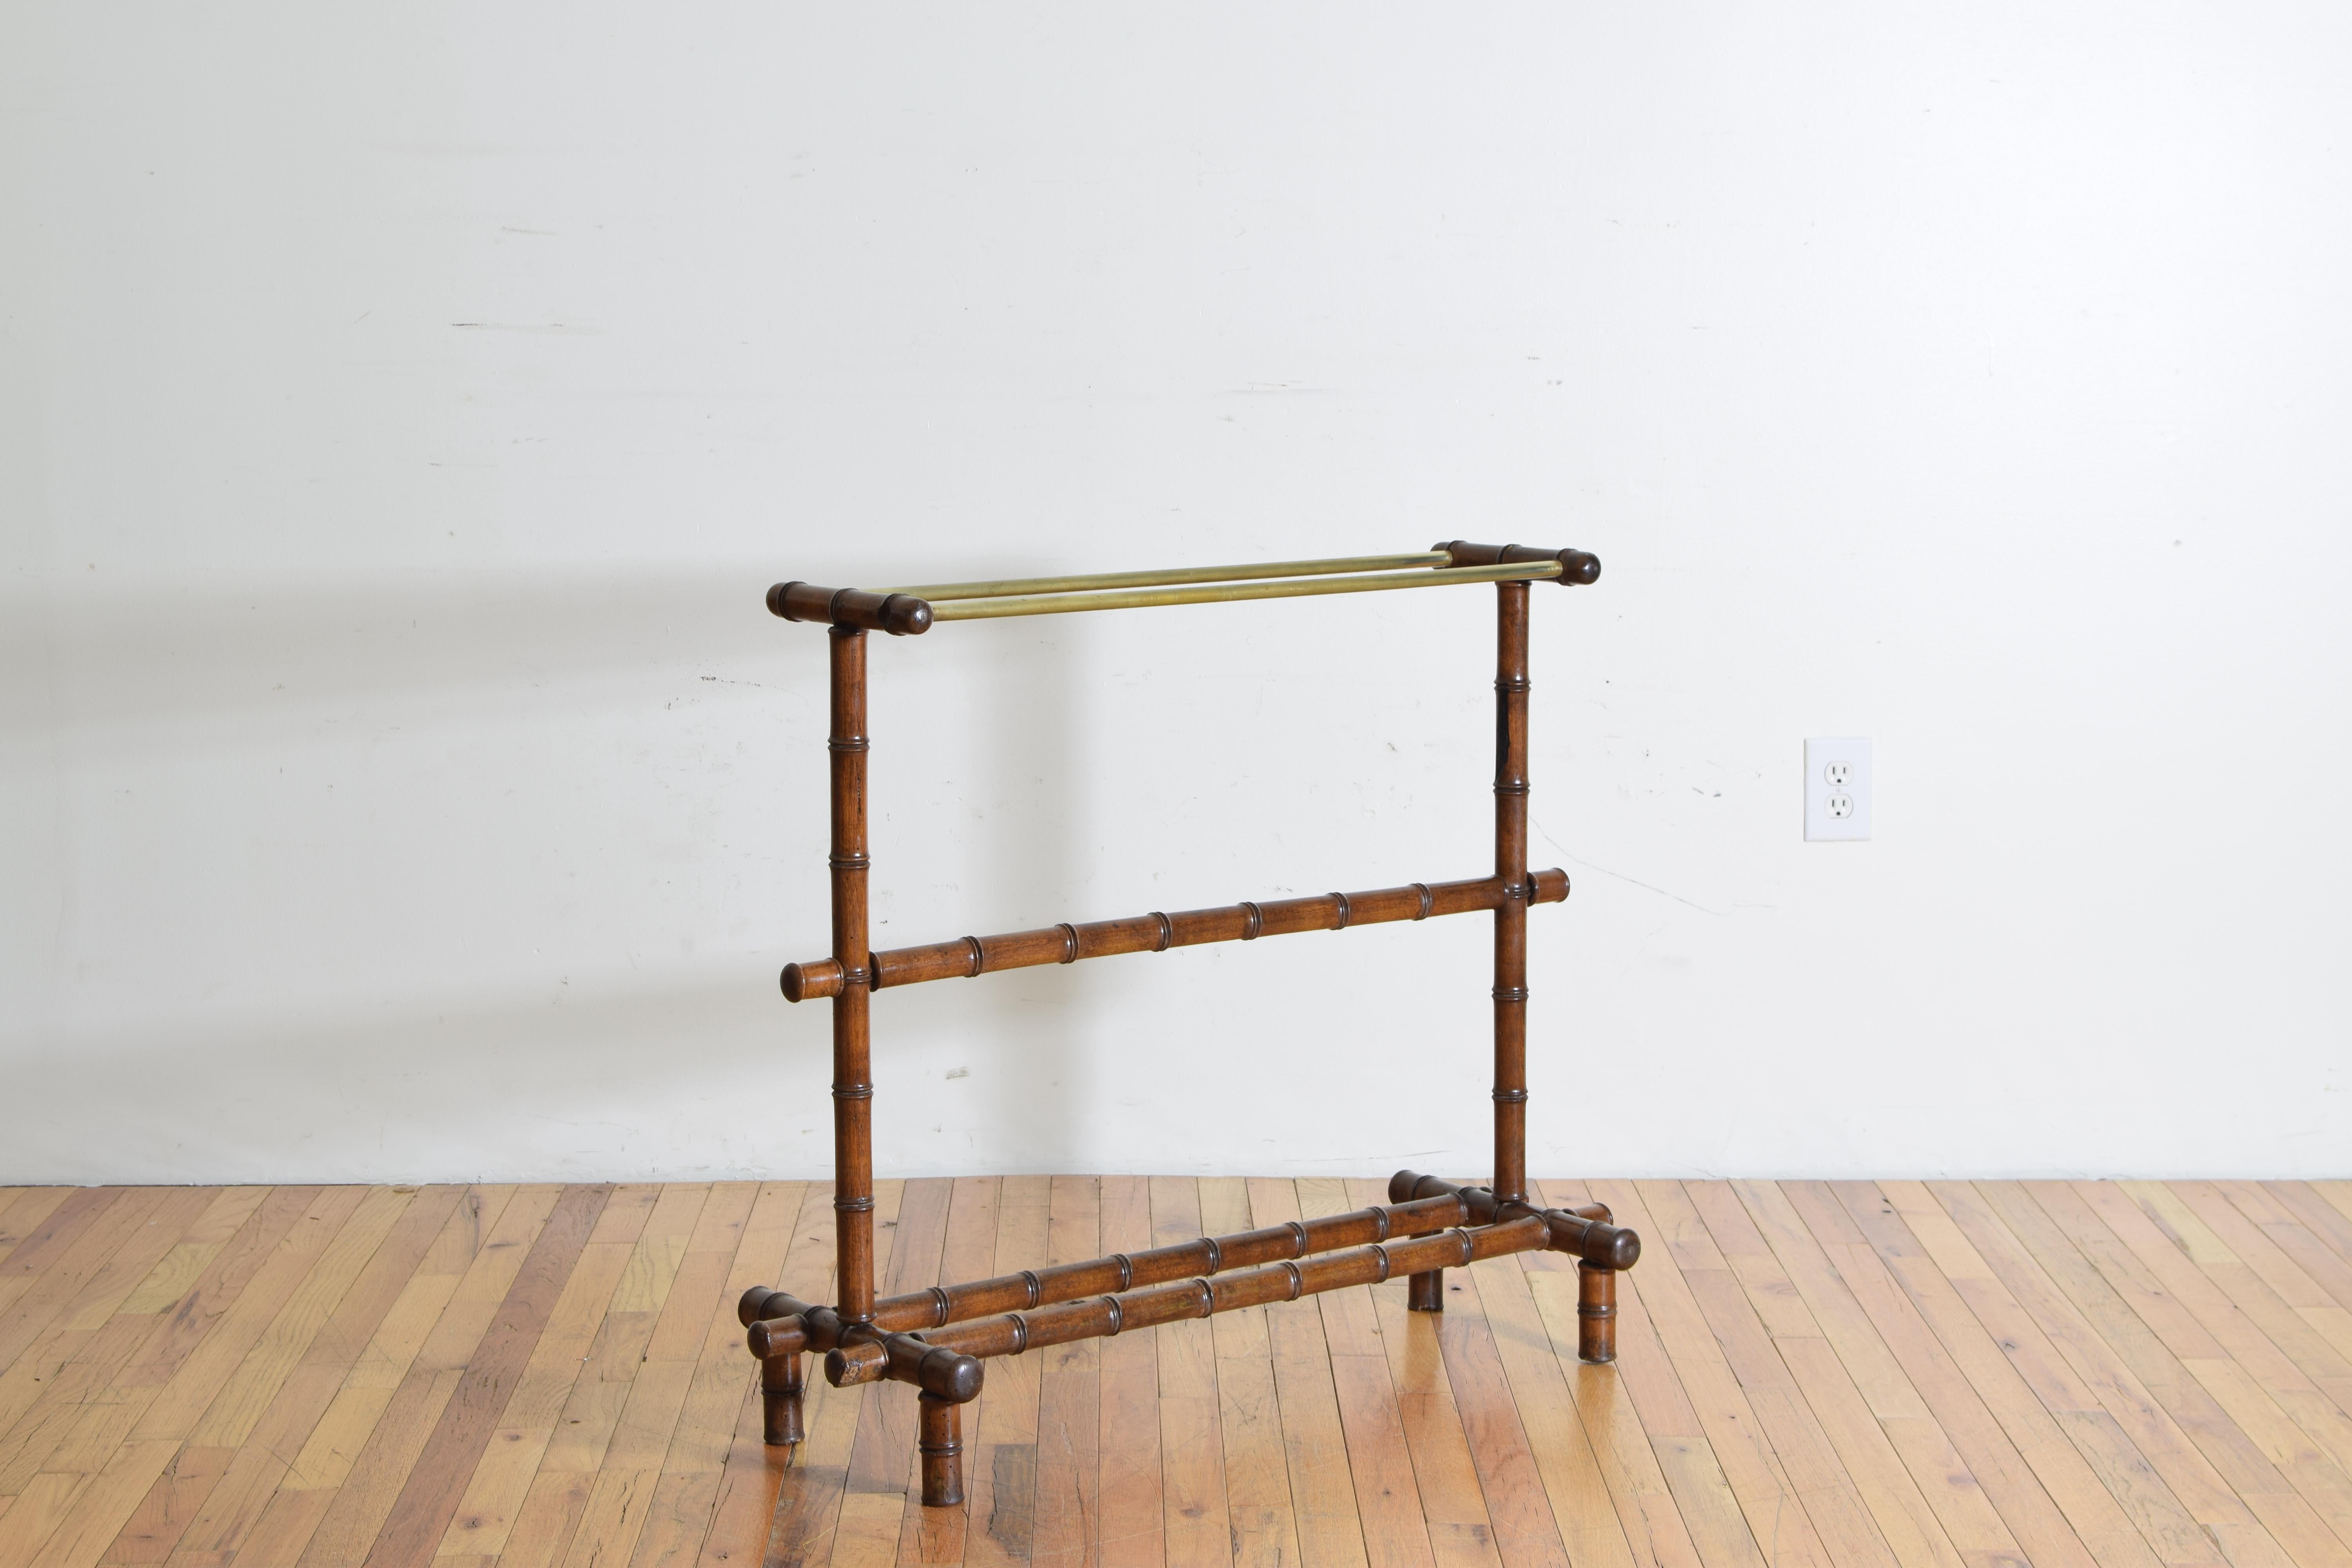 Raised on straight feet the trestle-form sides joined by a bottom double stretcher and a middle single stretcher, the upper portion with two brass hanging rods.